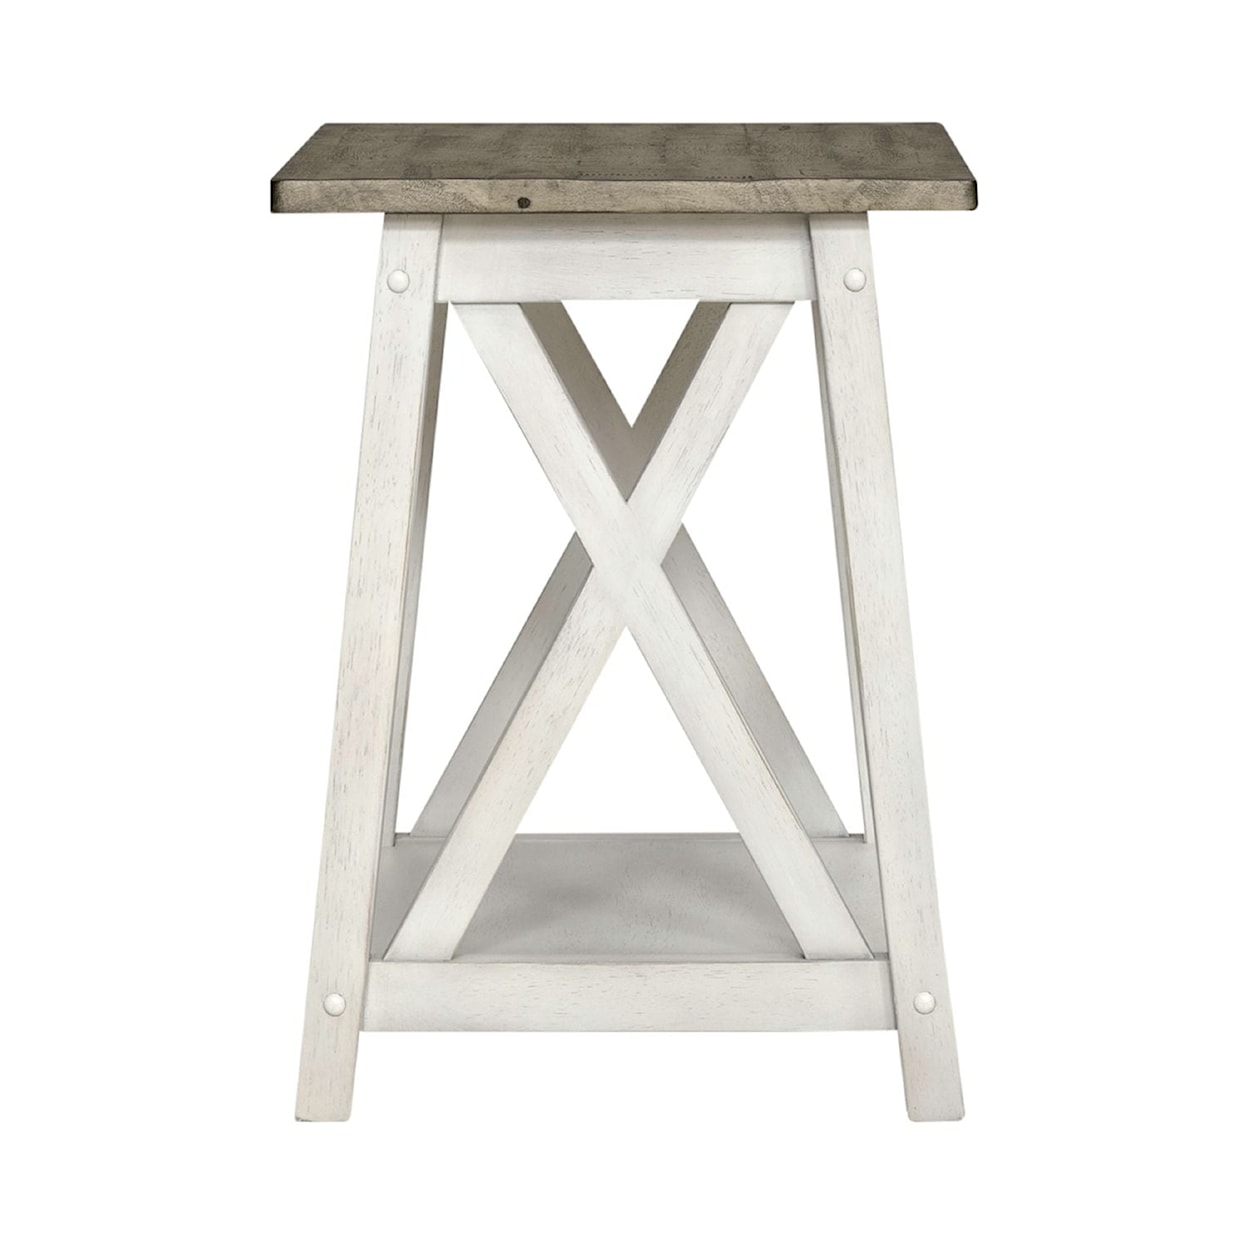 Liberty Furniture Laurel Bluff End Table